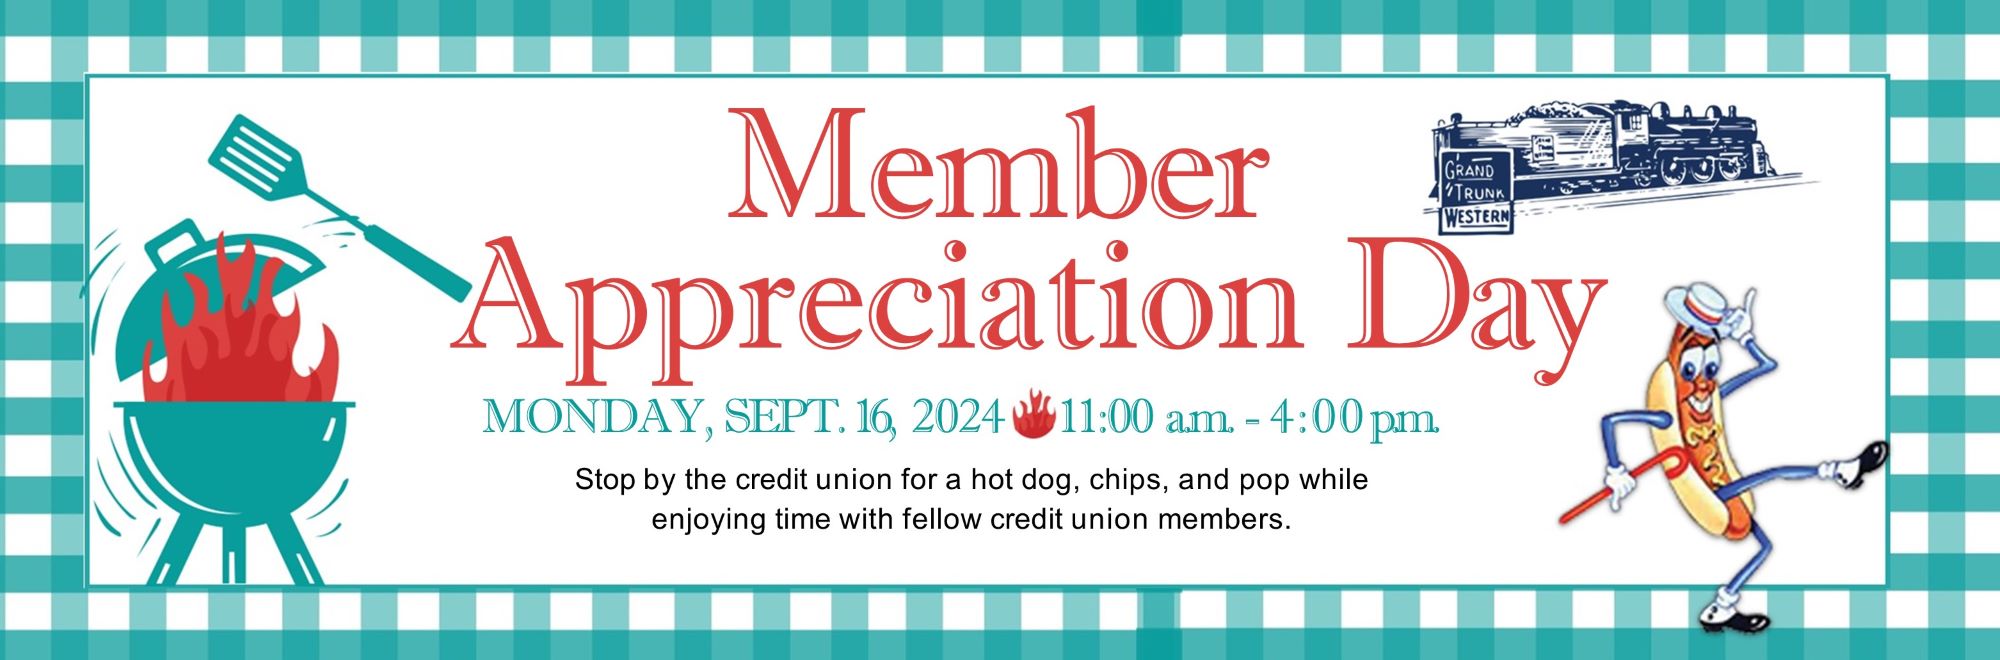 Member Appreciation Day. MONDAY, SEPT. 16, 2024 11:00 a.m. -4:00 p.m. Stop by the credit union for a hot dog, chips, and pop while 
enjoying time with fellow credit union members.

